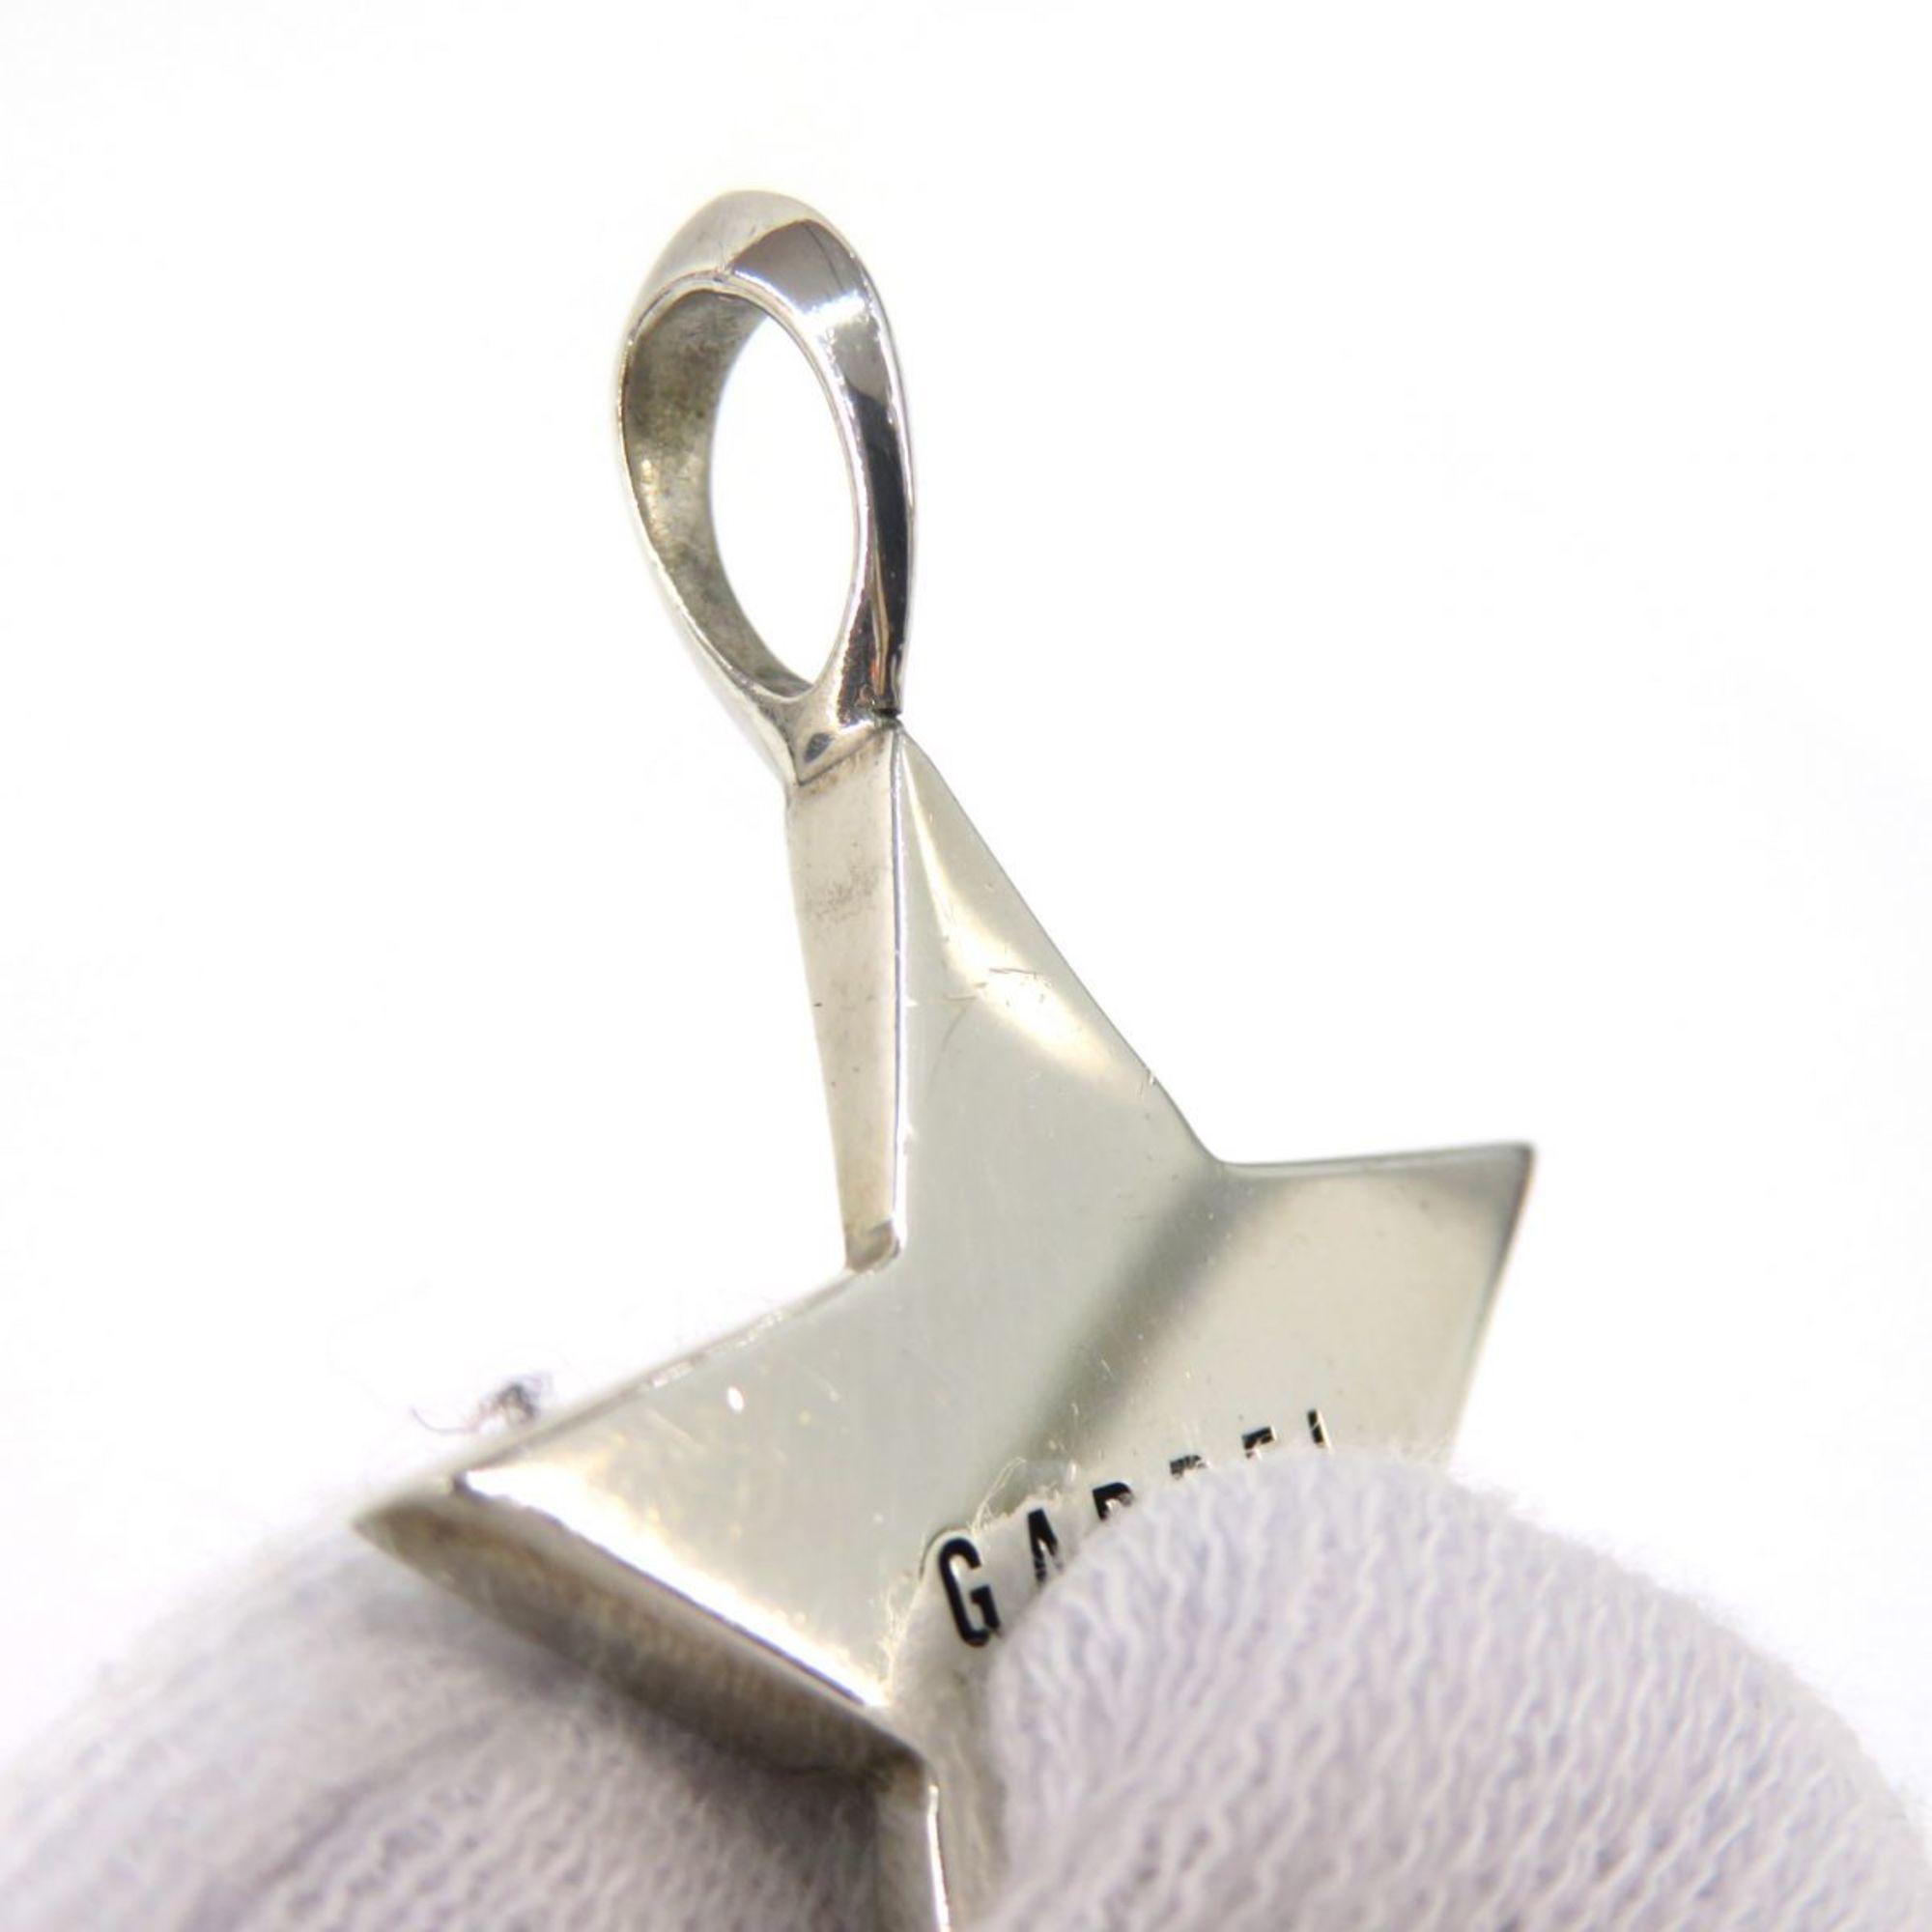 GARDEL CLASSIC STAR PENDANT GDP-122 Sterling Silver